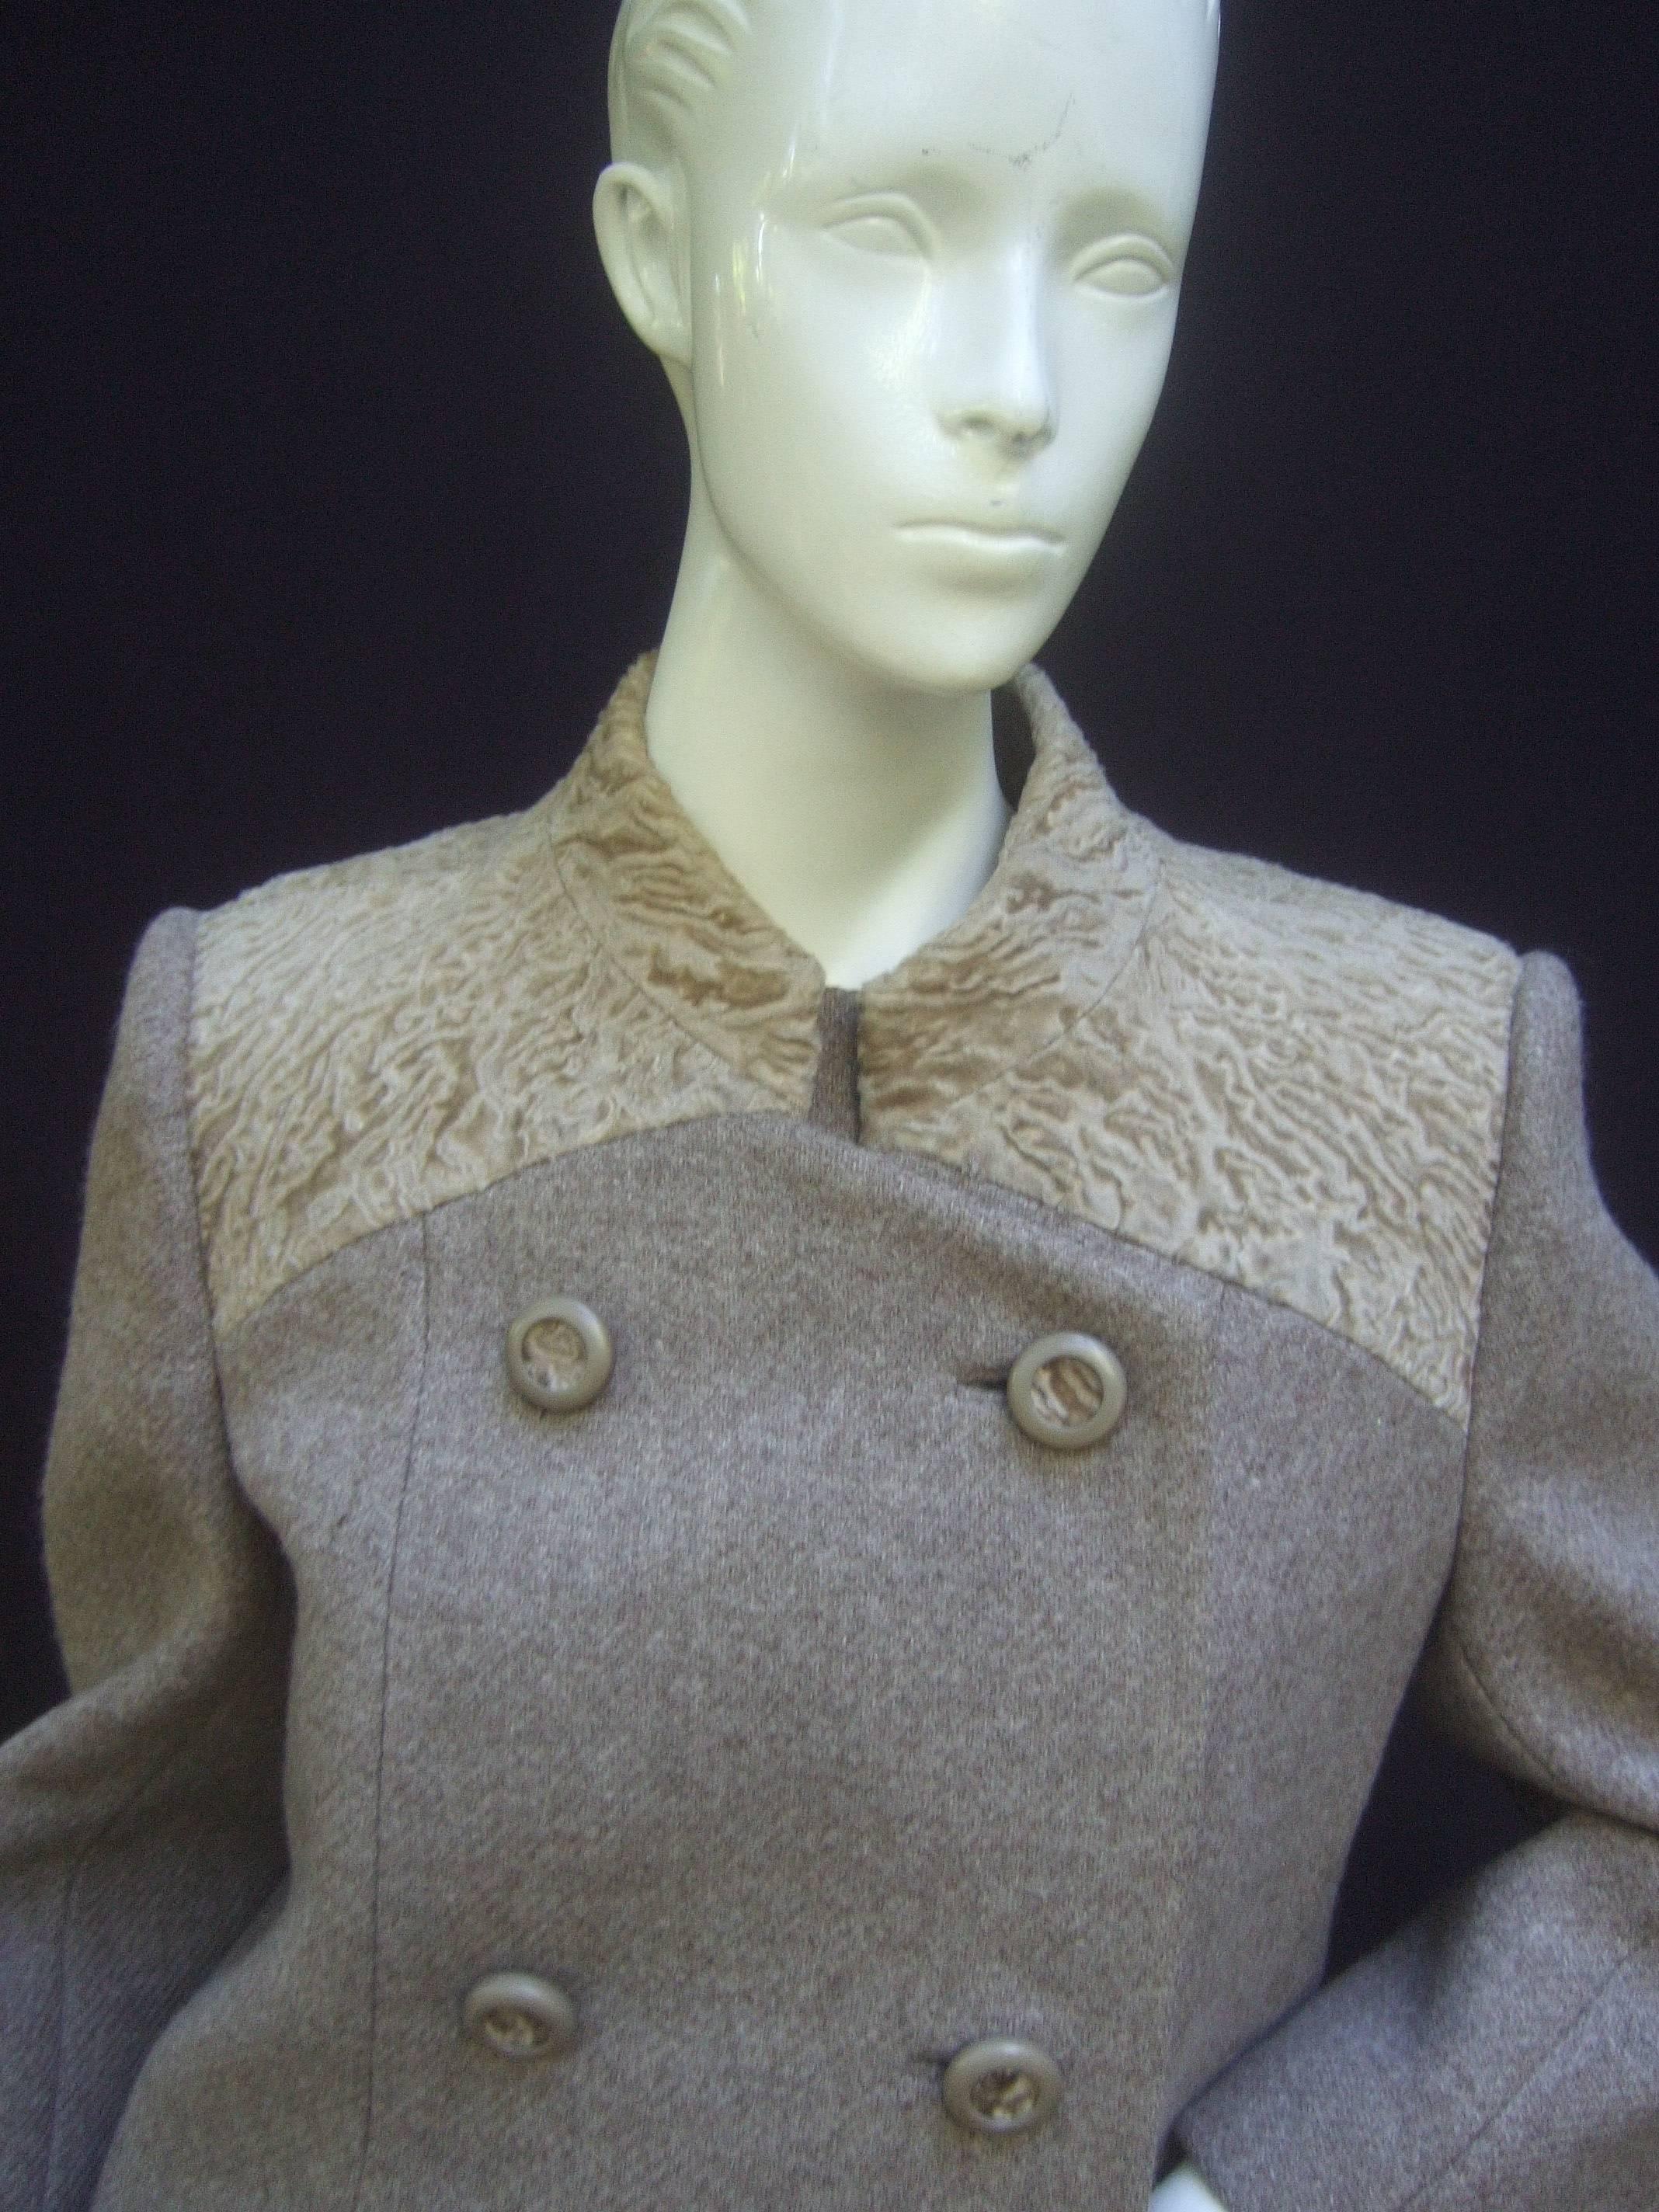 Peck & Peck Rare broad tail trim brown wool jacket & sheath c 1970s
The stylish ensemble is designed with Persian lamb broad tail
fur detail on the front, back shoulders & frames the collar  

The large beige resin buttons on the jacket are